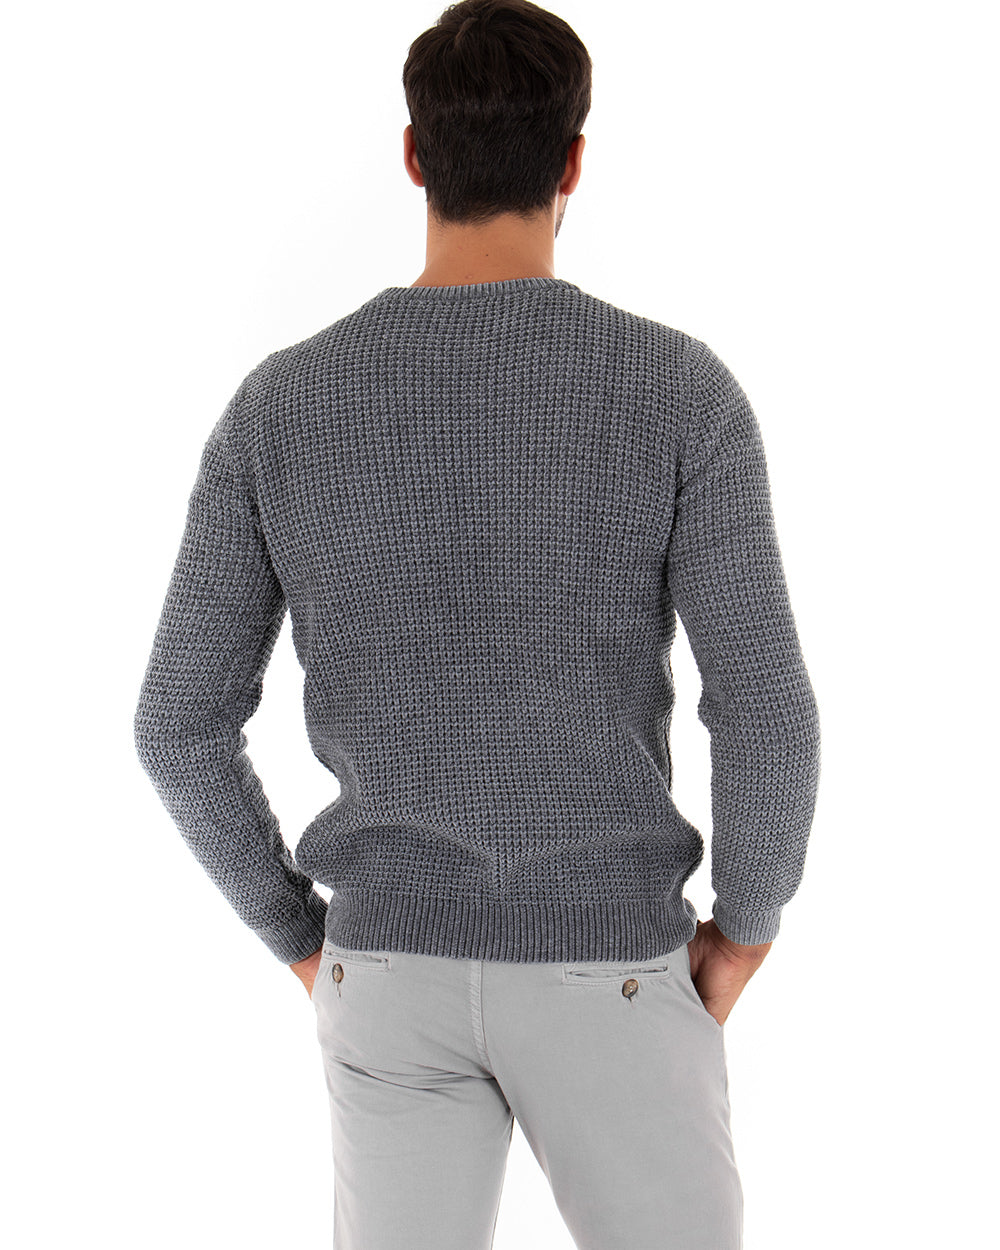 Men's Sweater Long Sleeves Chenille Solid Color Gray Crew Neck GIOSAL